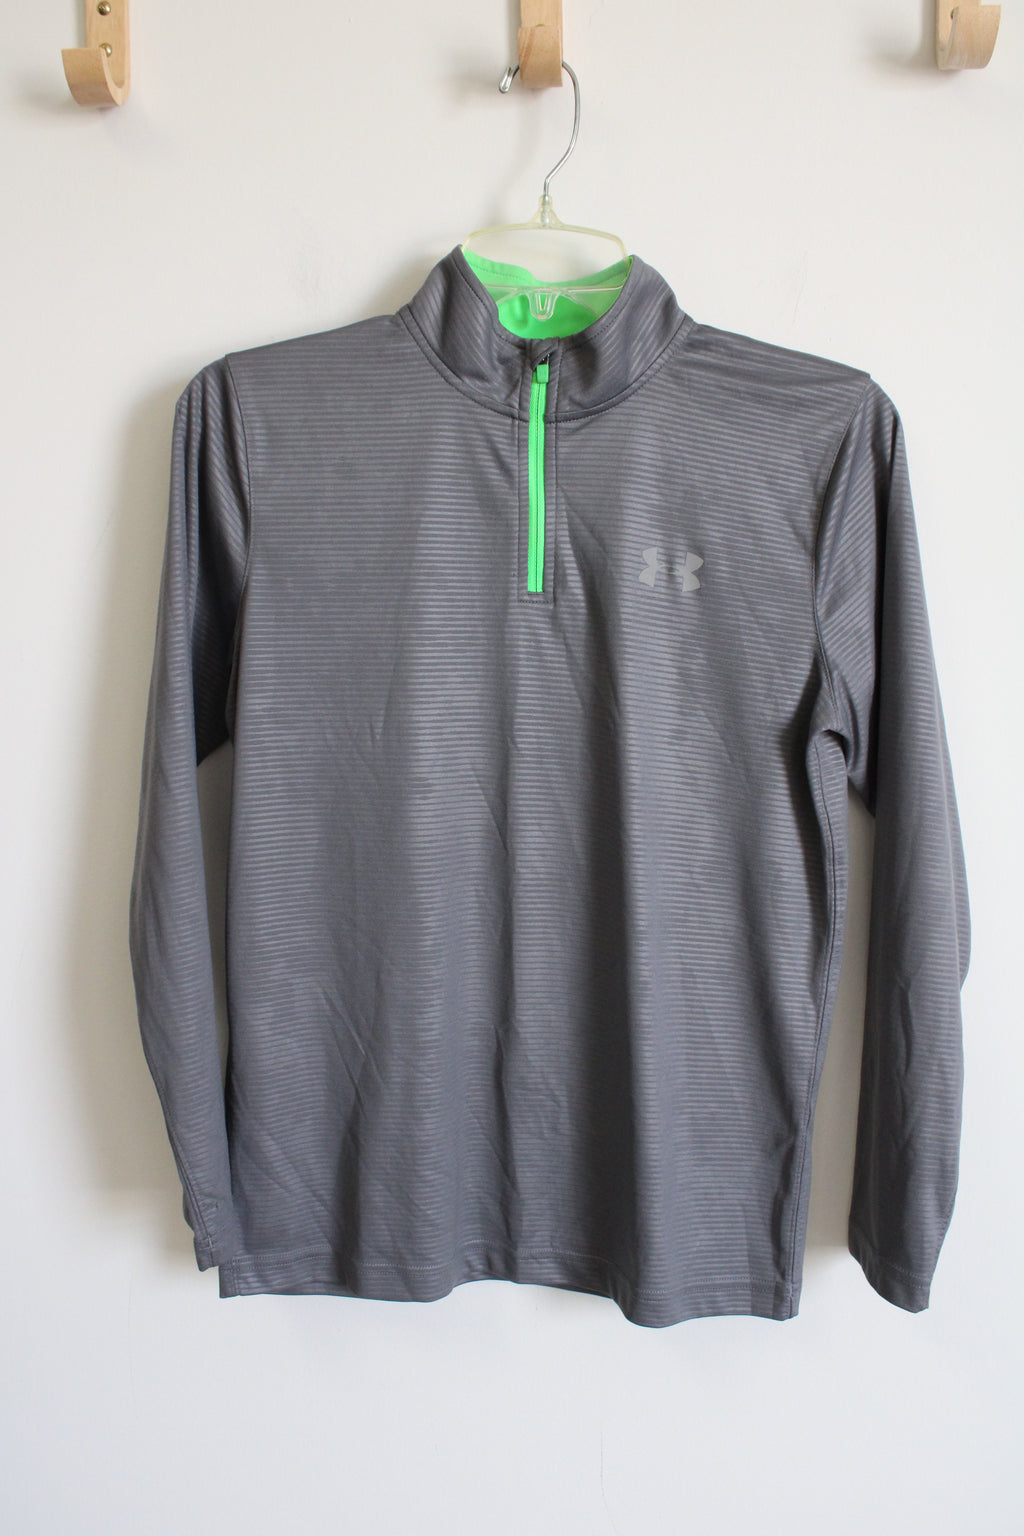 Under Armour Loose Fit HeatGear Gray Green Quarter Zip Pullover | Youth L (16/18)